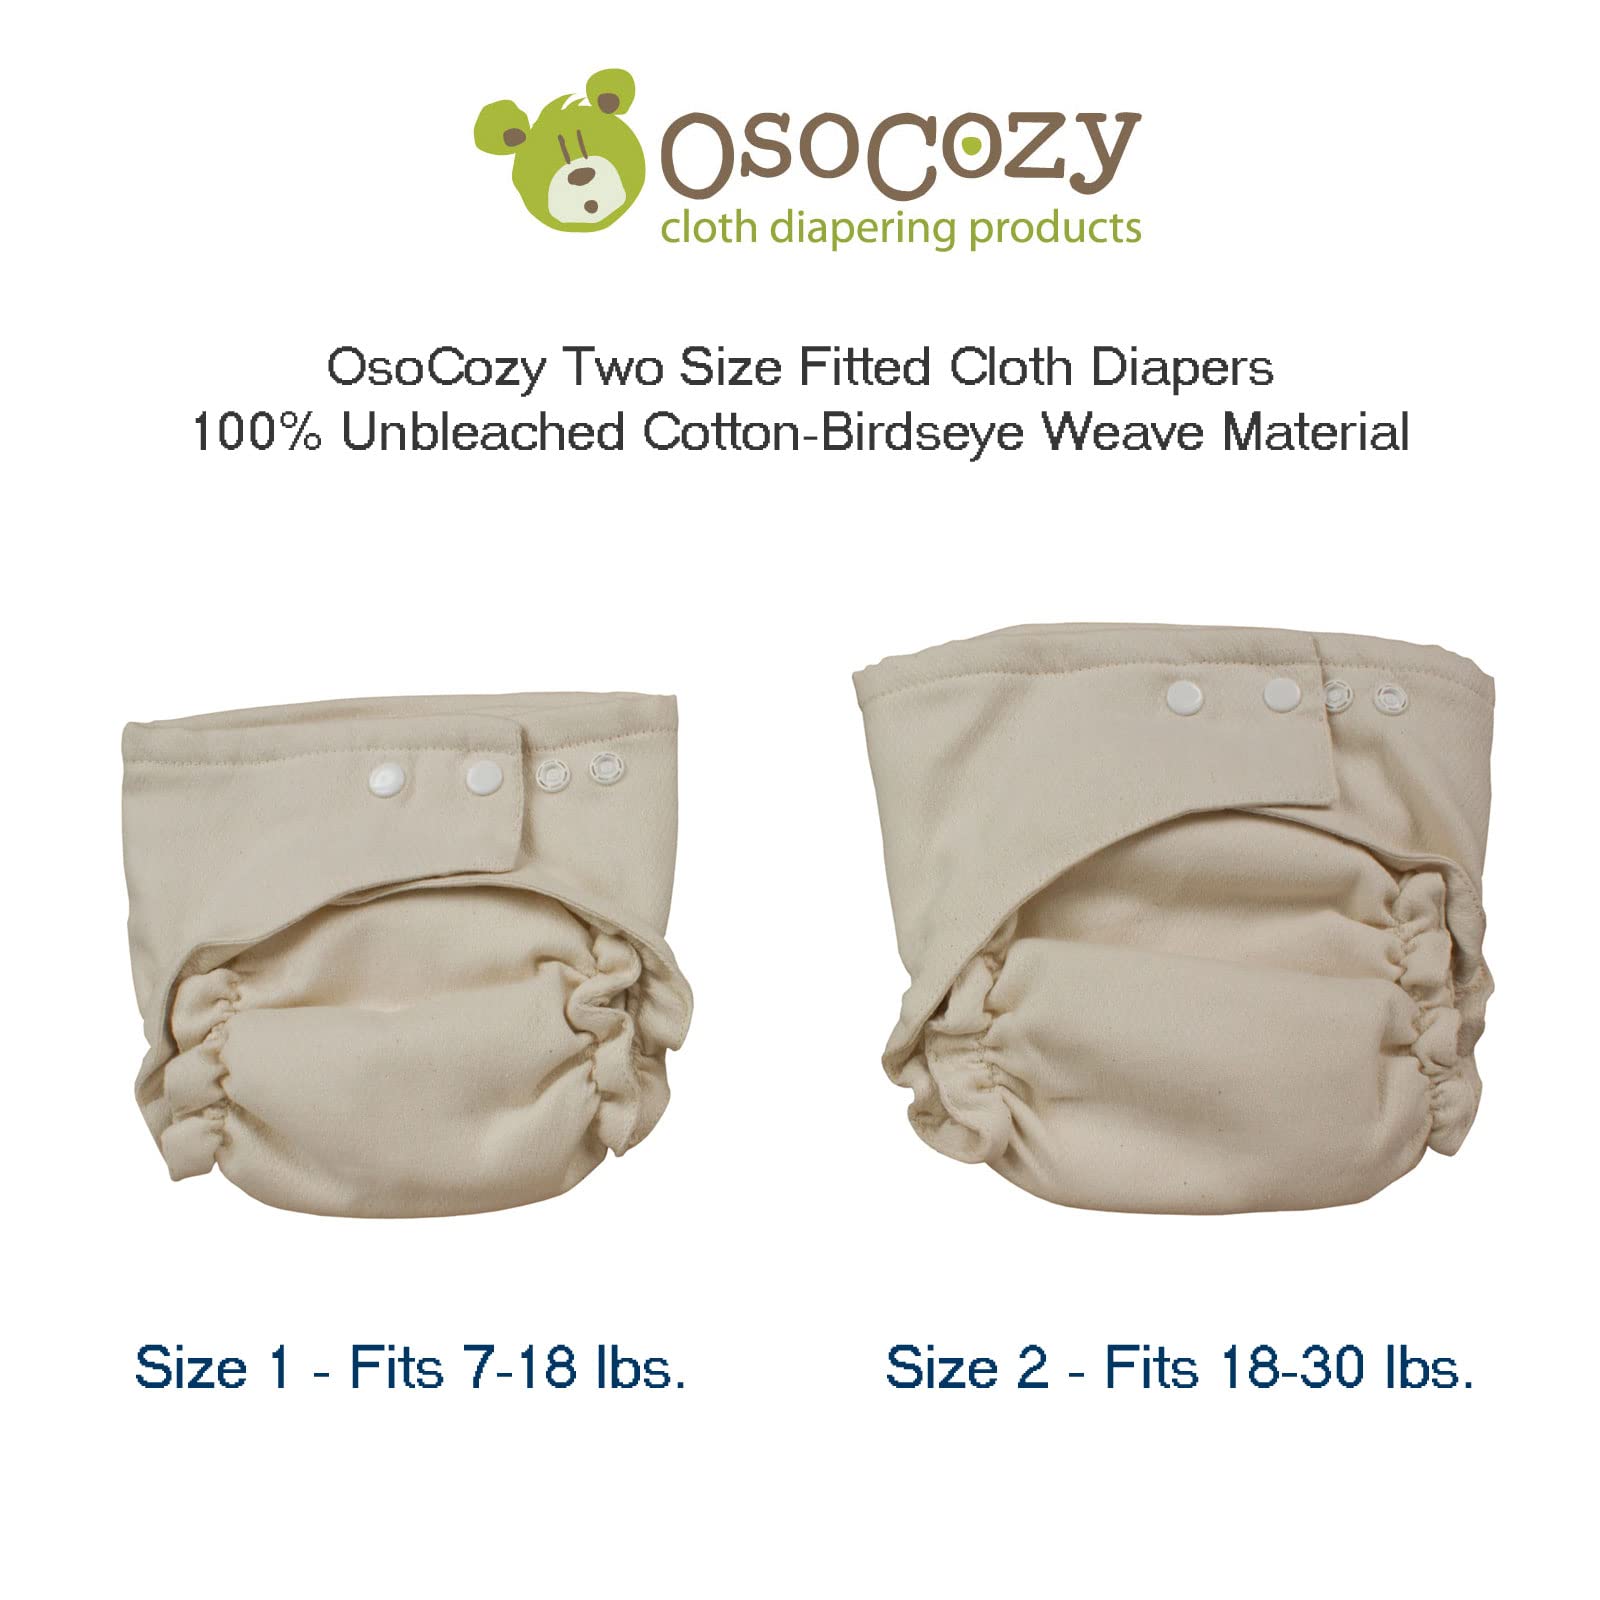 Osocozy Two Sized Fitted Cloth Diaper - 6 Count (Pack of 1) - Soft, Durable and Absorbent 100% Cotton Birdseye Weave Material. Easy to Use Snap Closures. Size 1 Fits 7-18 lbs